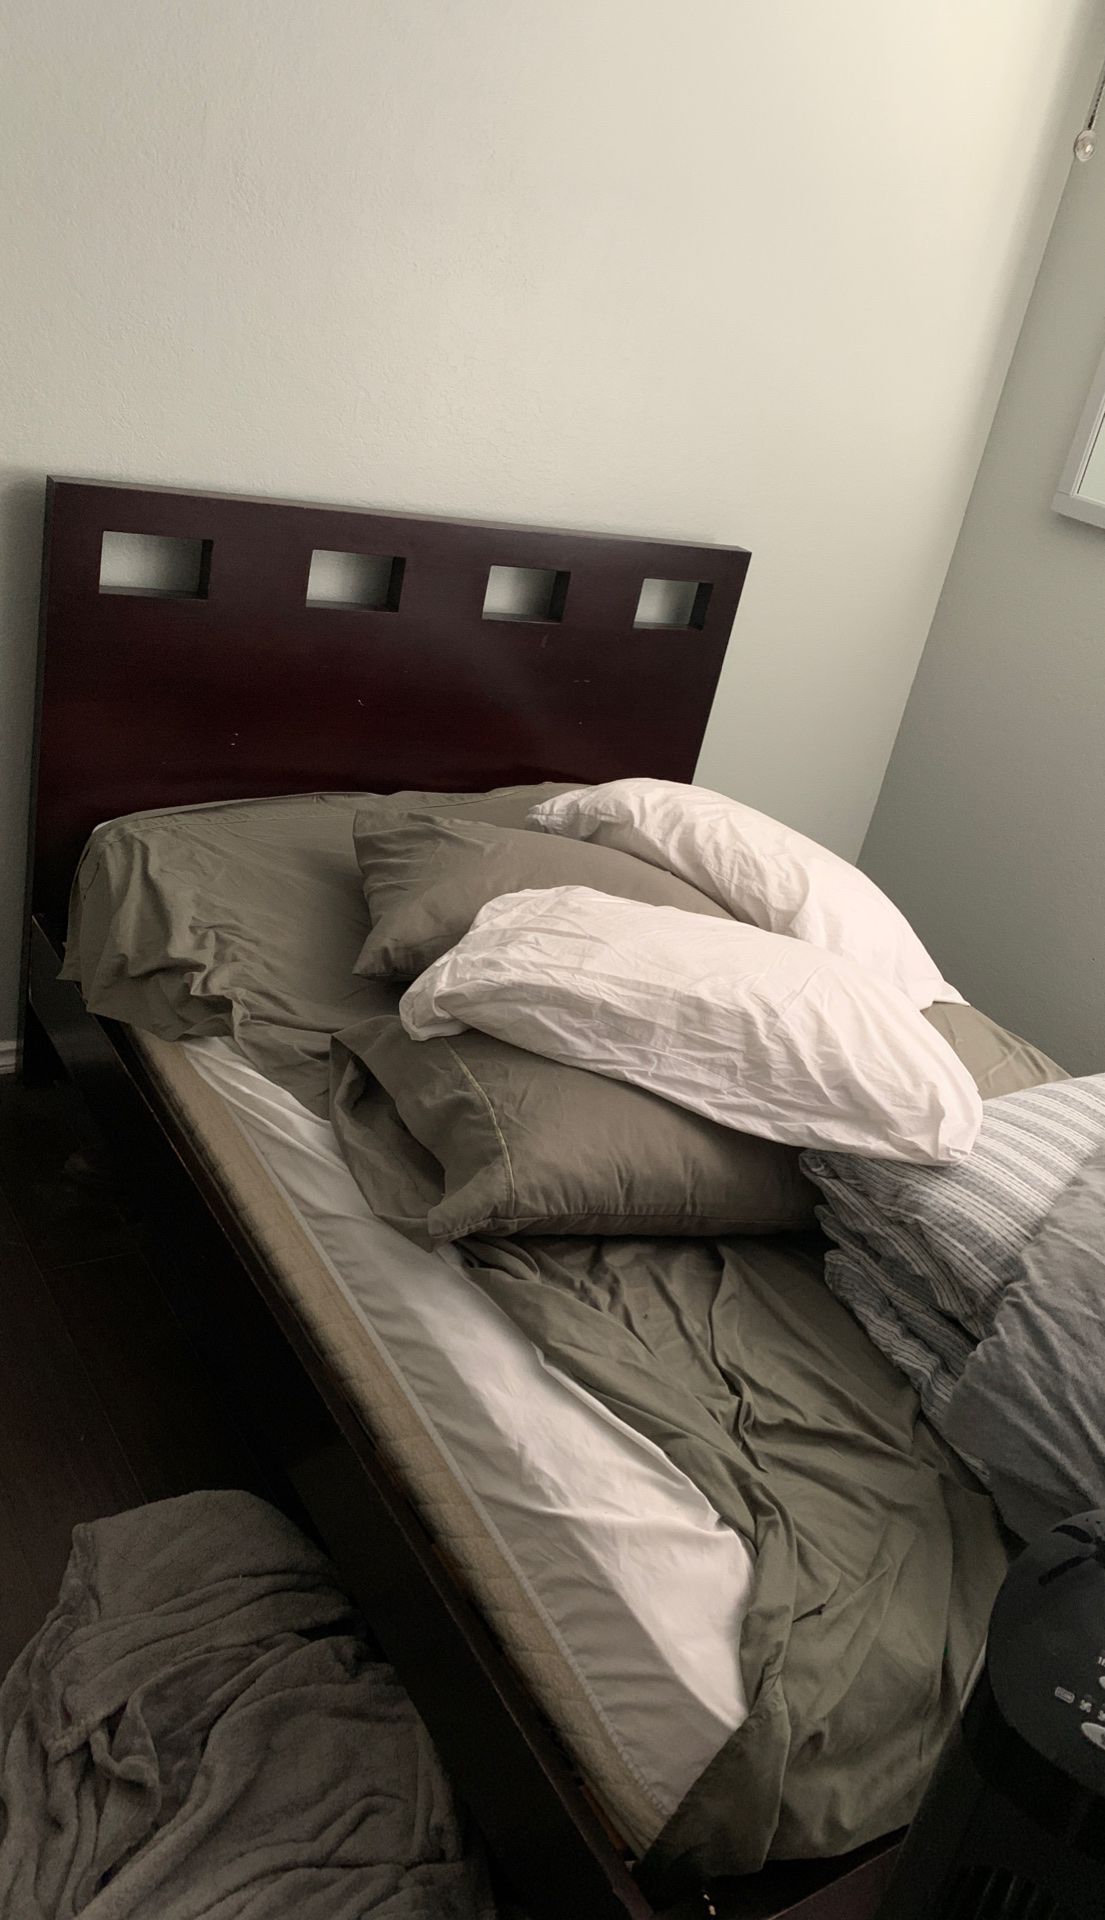 Free full size bed